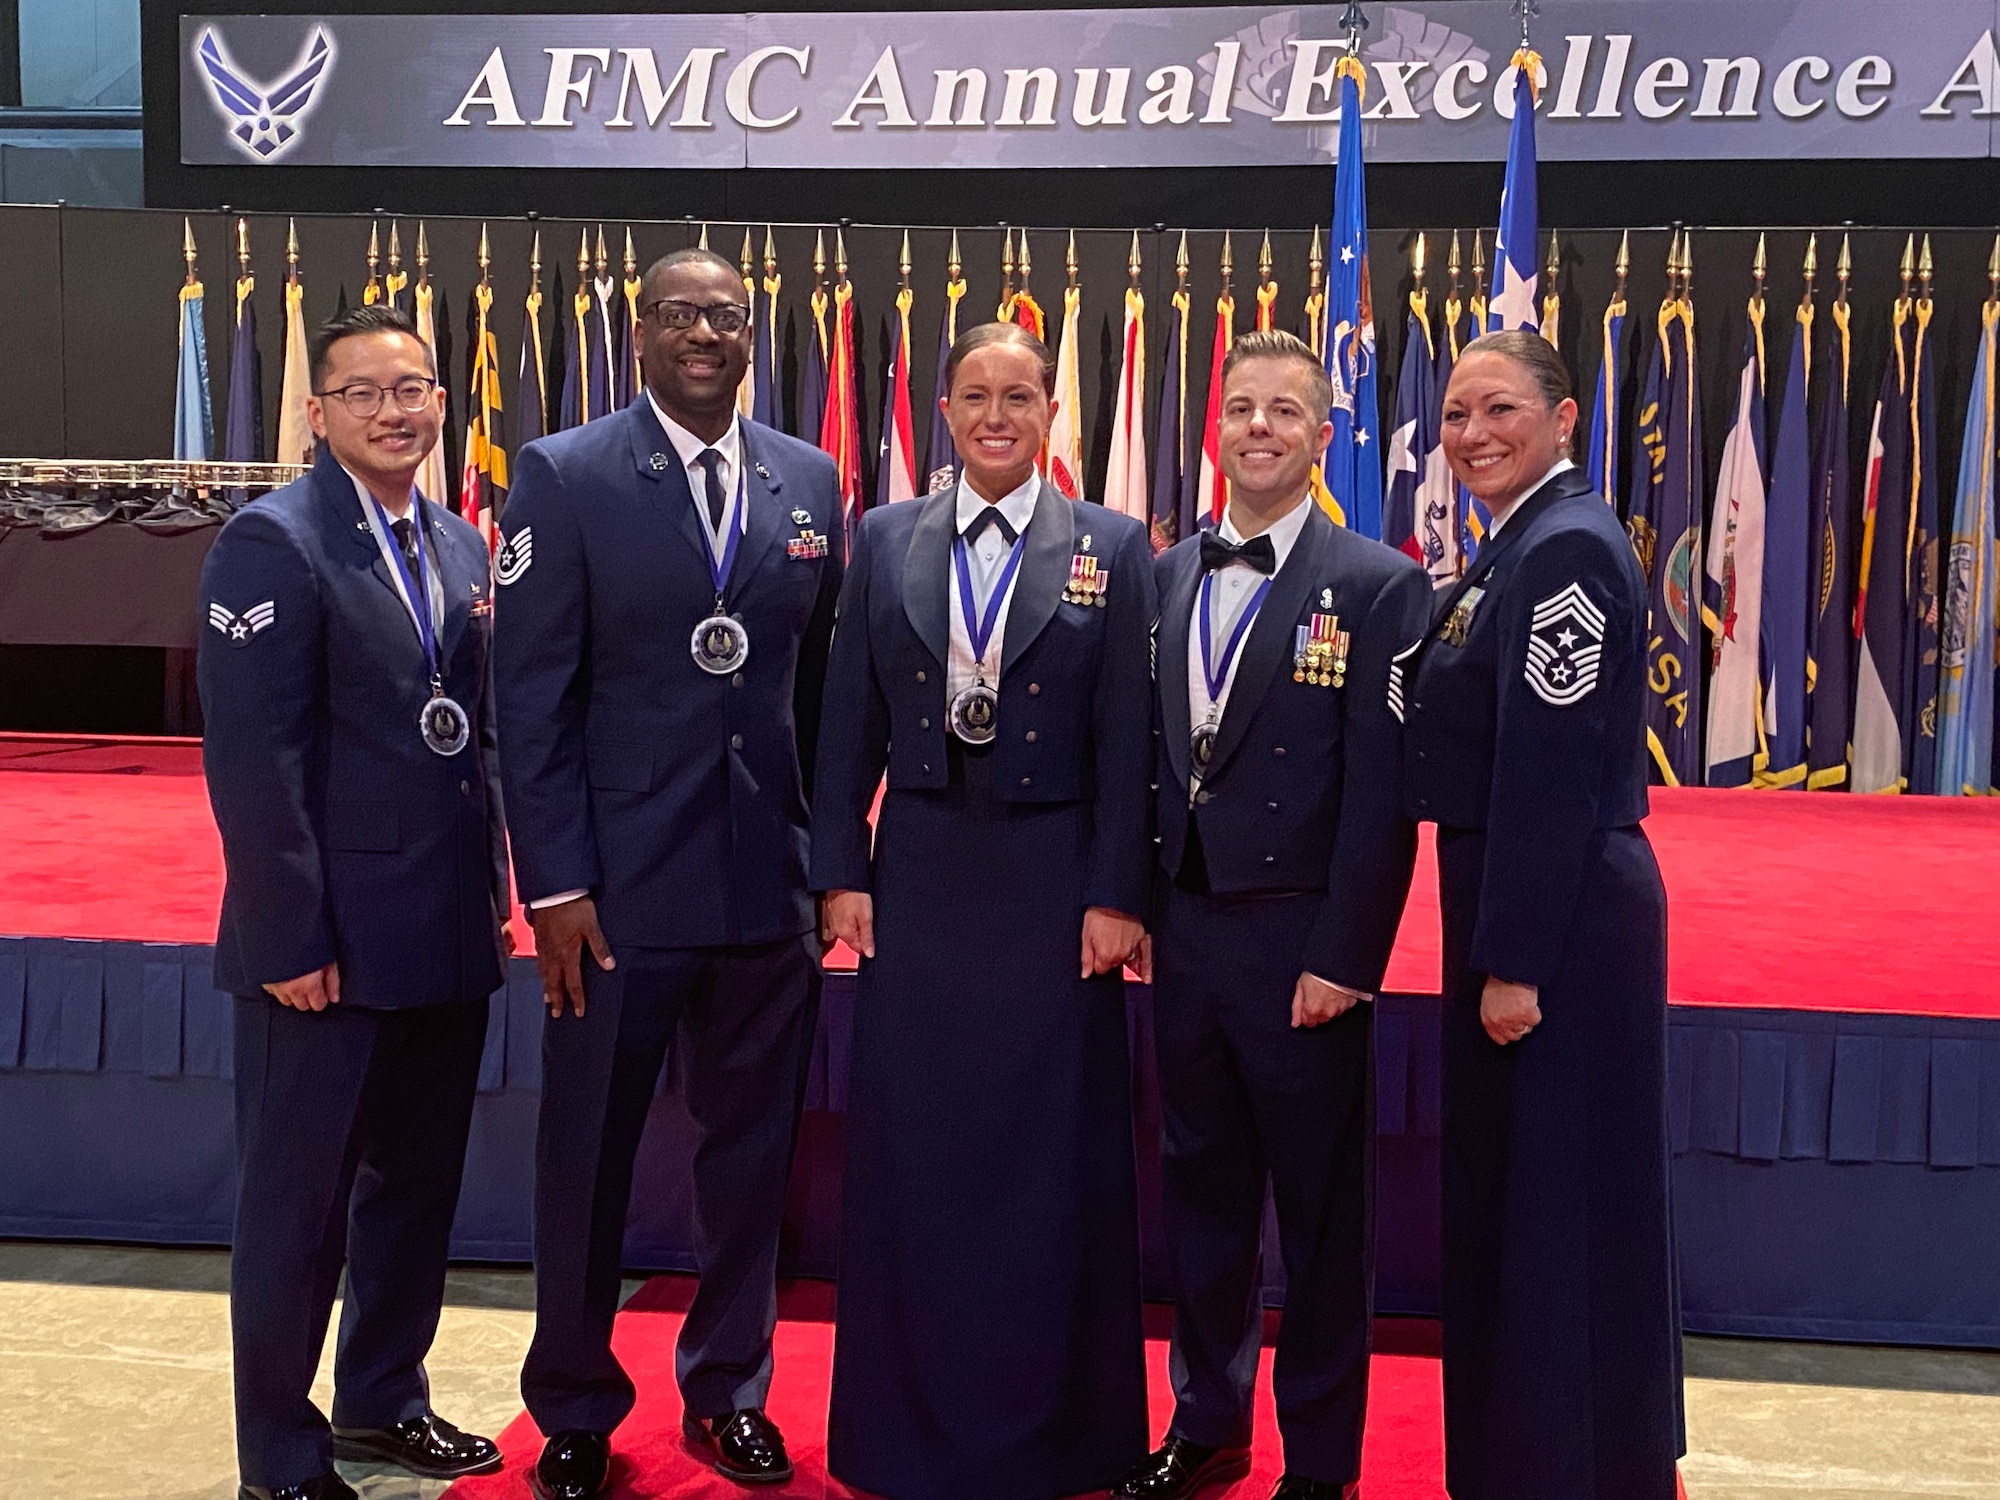 Chief Master Sgt. Sevin Balkuvvar poses for a photo with award winners at the Air Force Material Command Annual Excellence Award Ceremony.